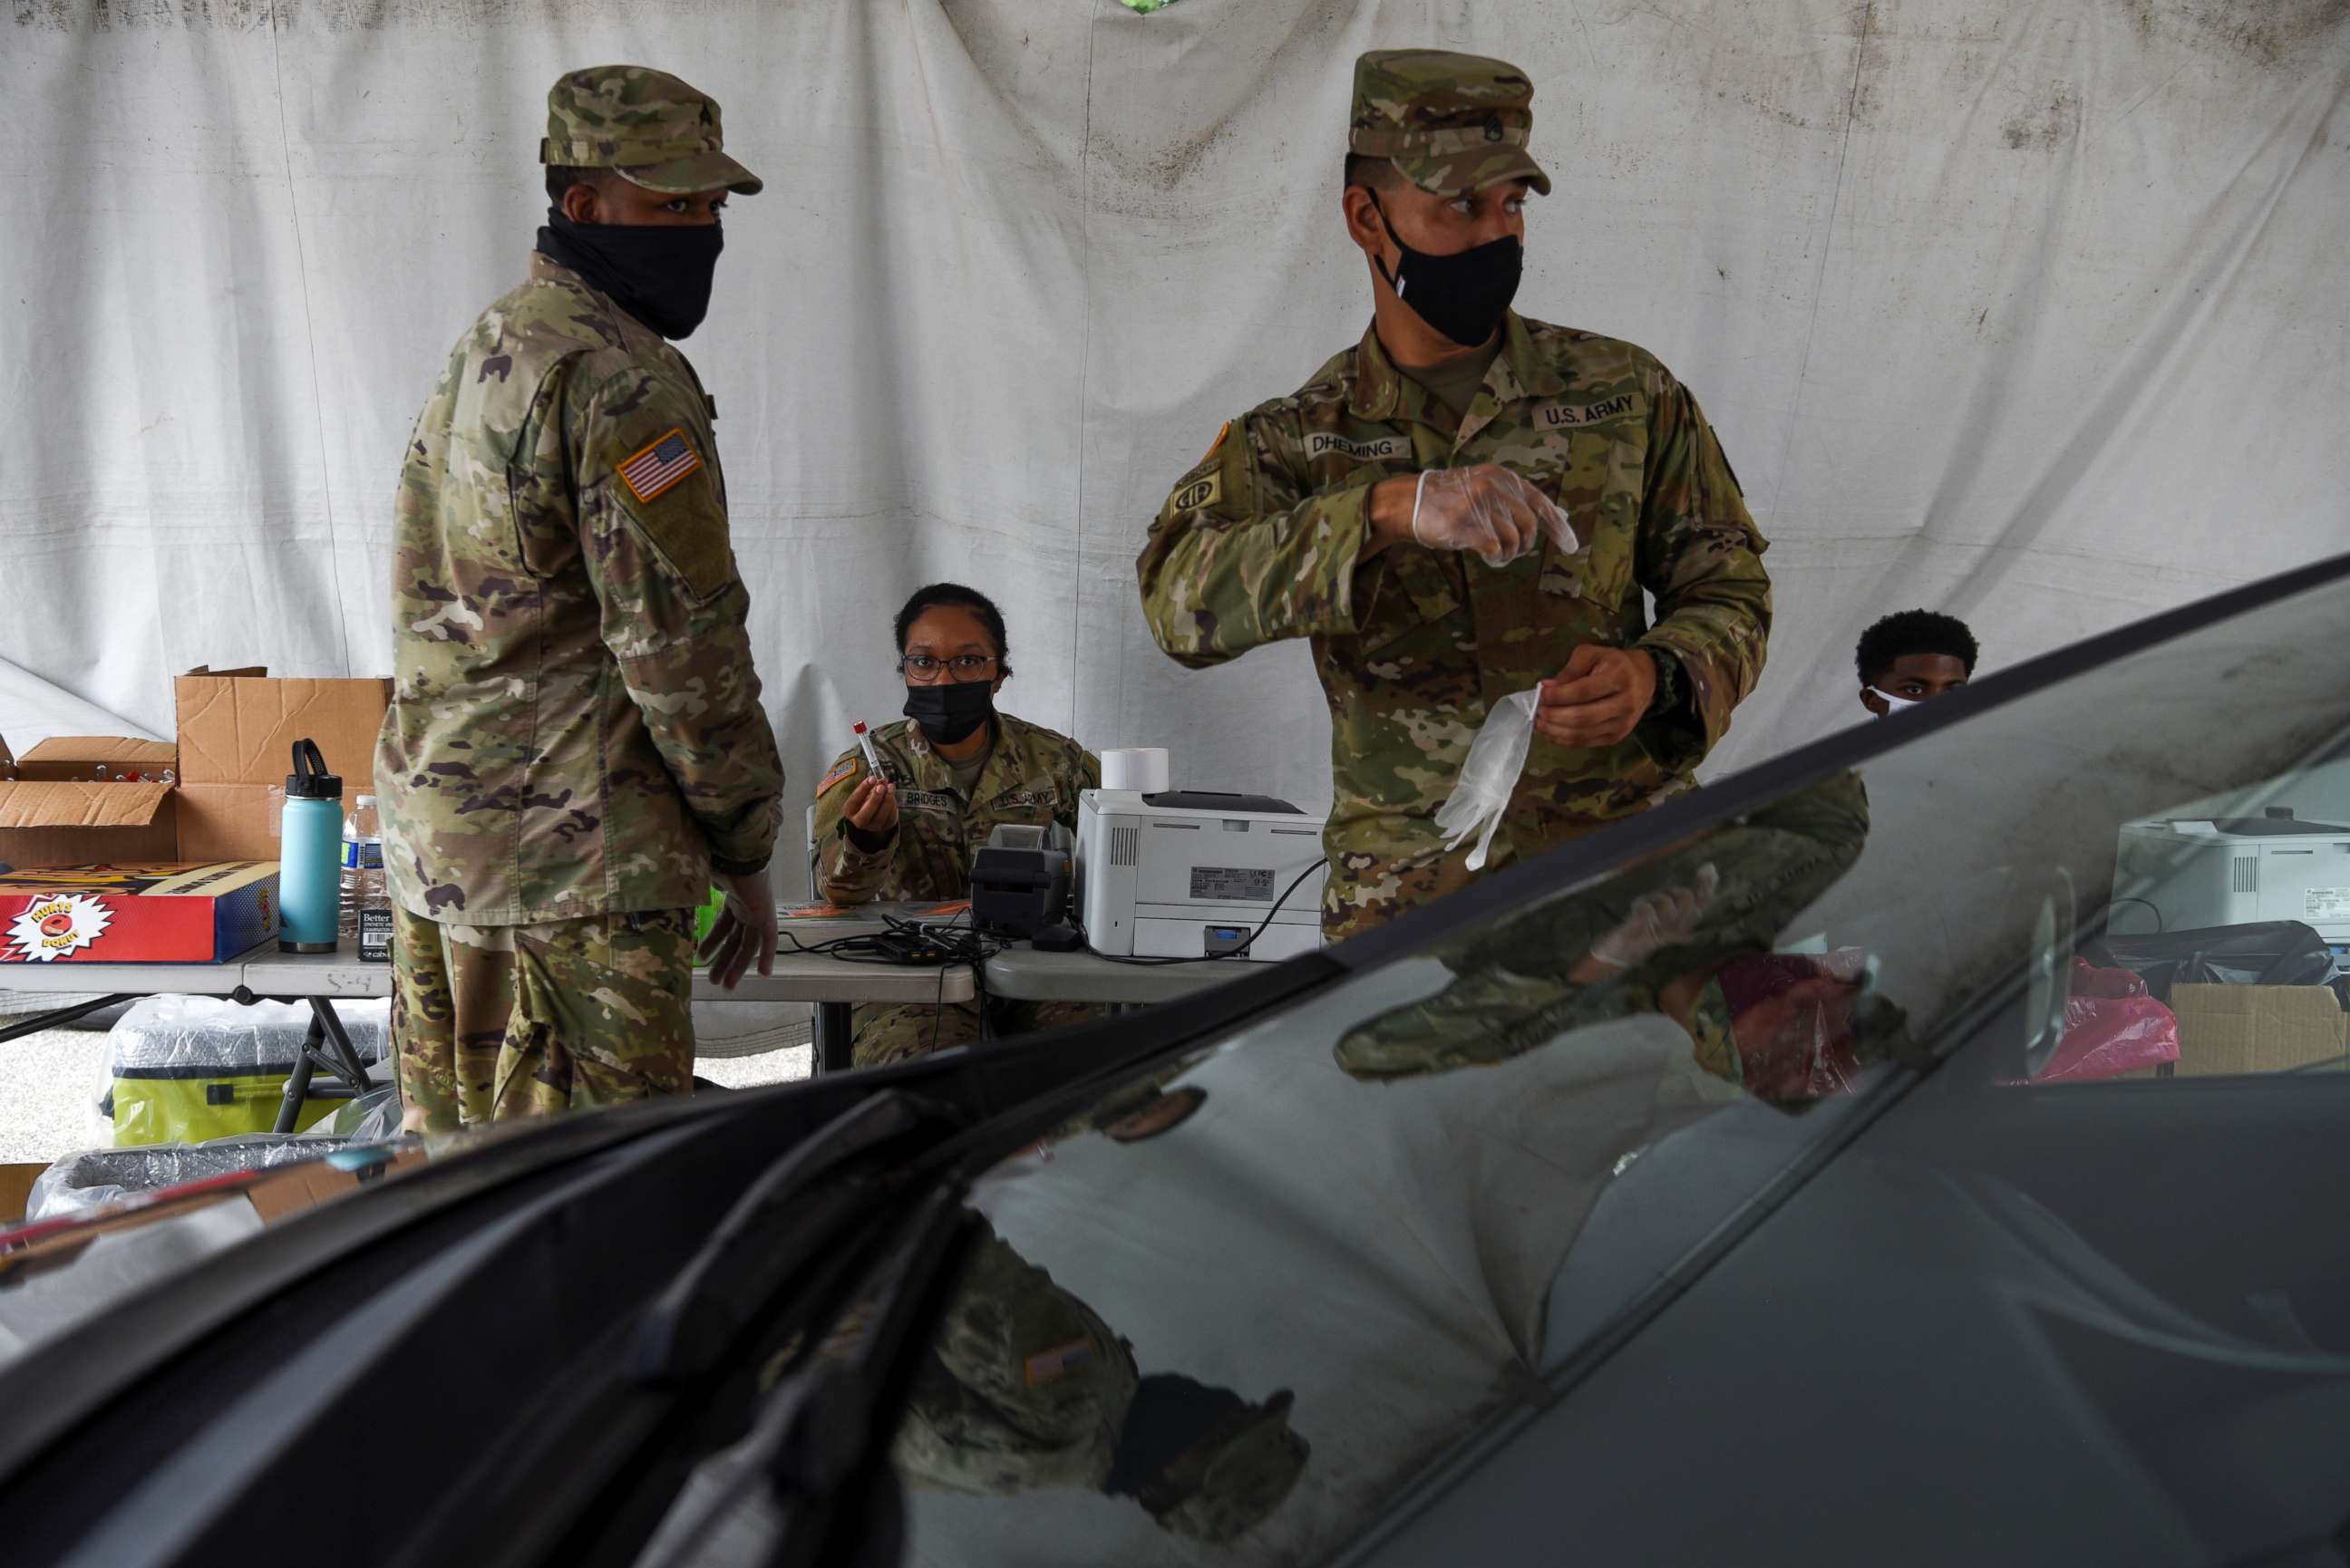 PHOTO: Members of the U.S. Army operate a drive-thru testing site as cases of the coronavirus disease surge across the state, in New Orleans, Aug. 6, 2021.